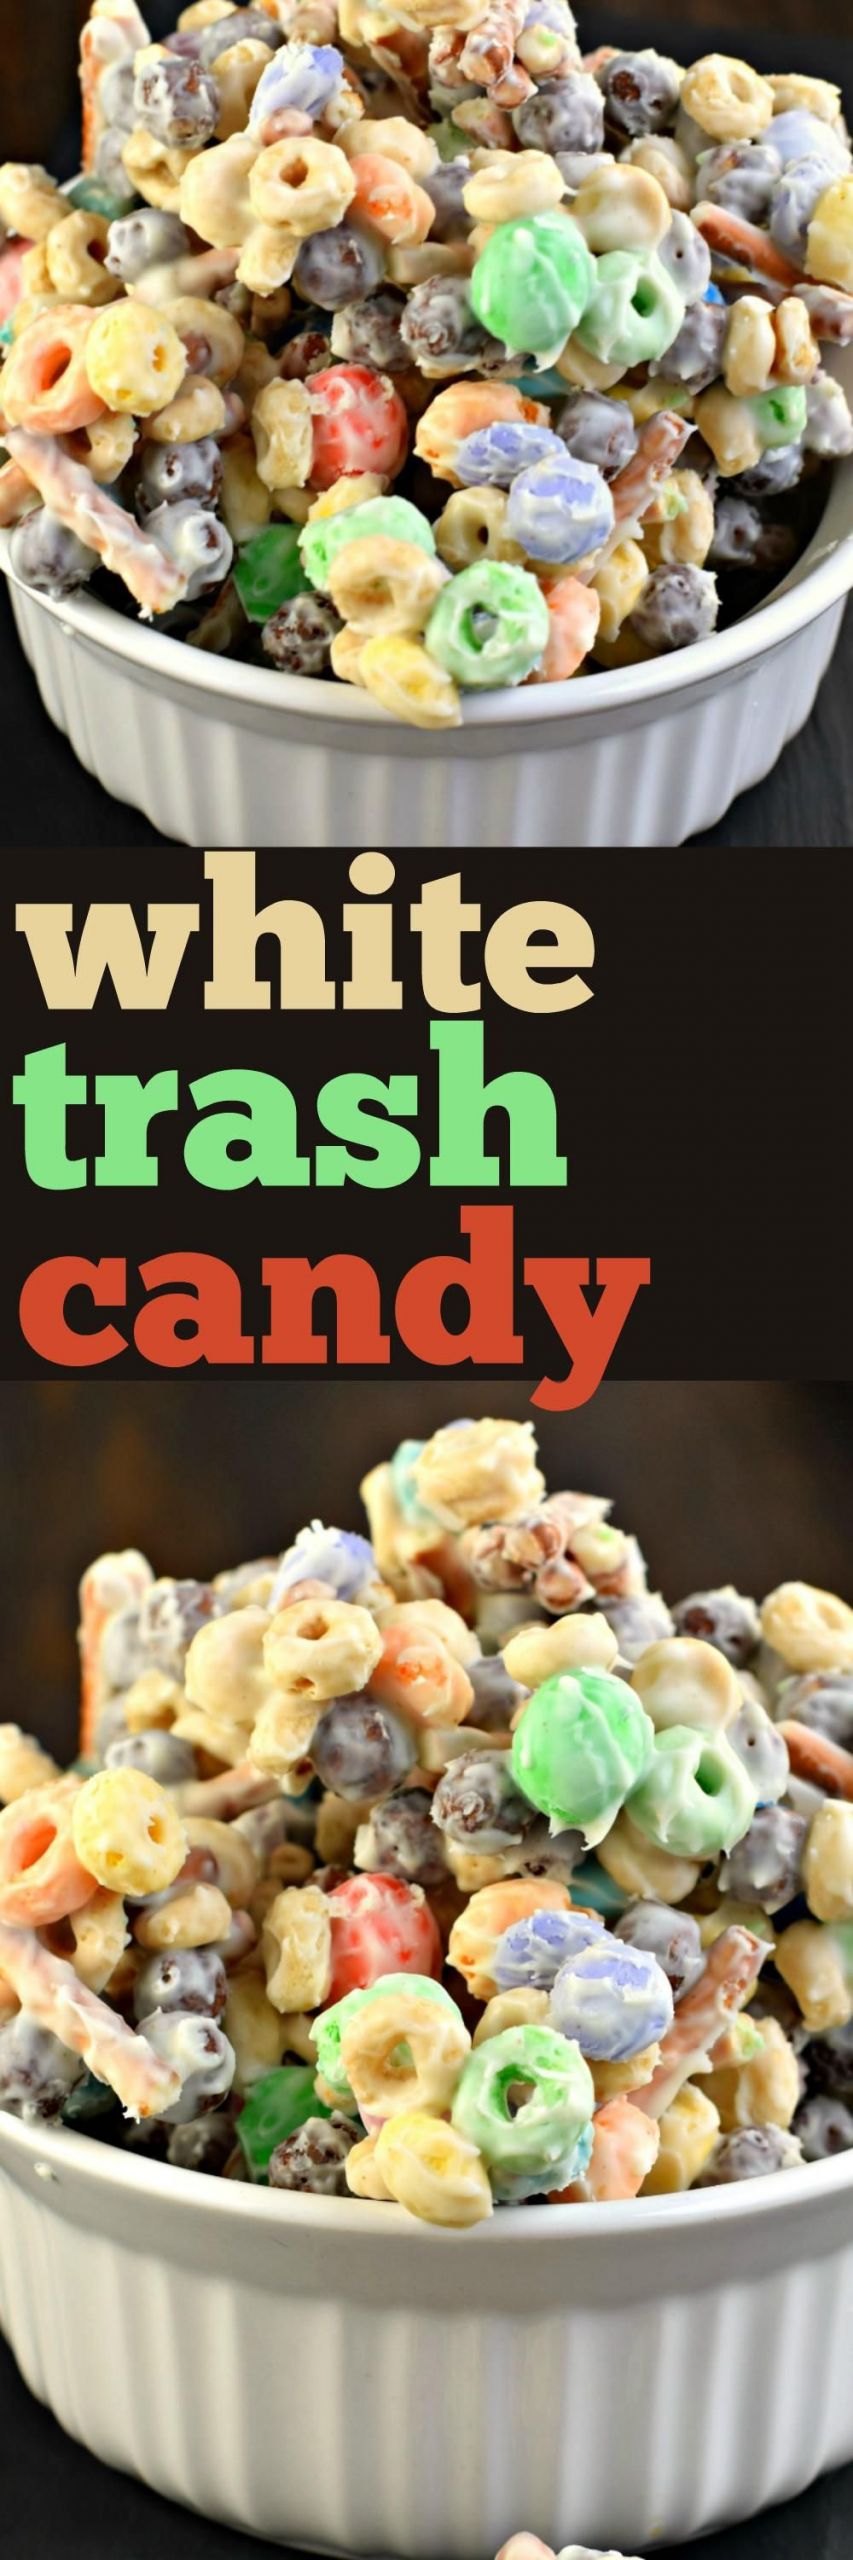 White Trash Dessert
 To make this easy white trash candy just toss to her